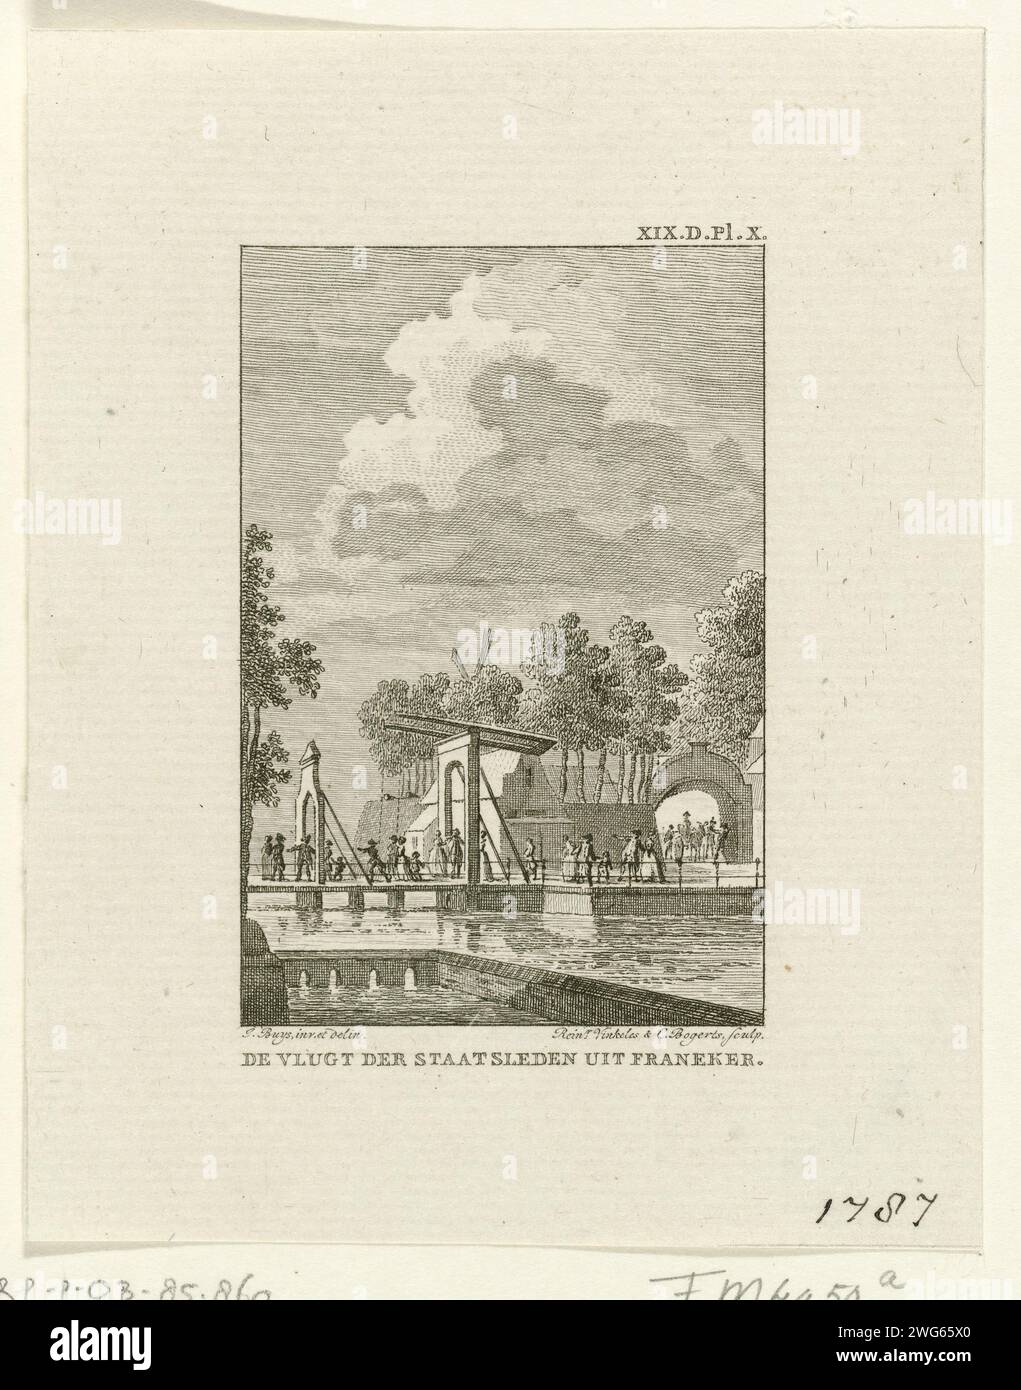 Flight of Patriots from Franeker, 1787, Reinier Vinkeles (I), After Jacobus Buys, 1787 - 1795 print Flight of Patriots with their families from Franeker, September 23, 1787. Marked at the top right: XIX.D.PL.X. Northern Netherlands paper etching / engraving flight of the government or its adherents Franeker Stock Photo